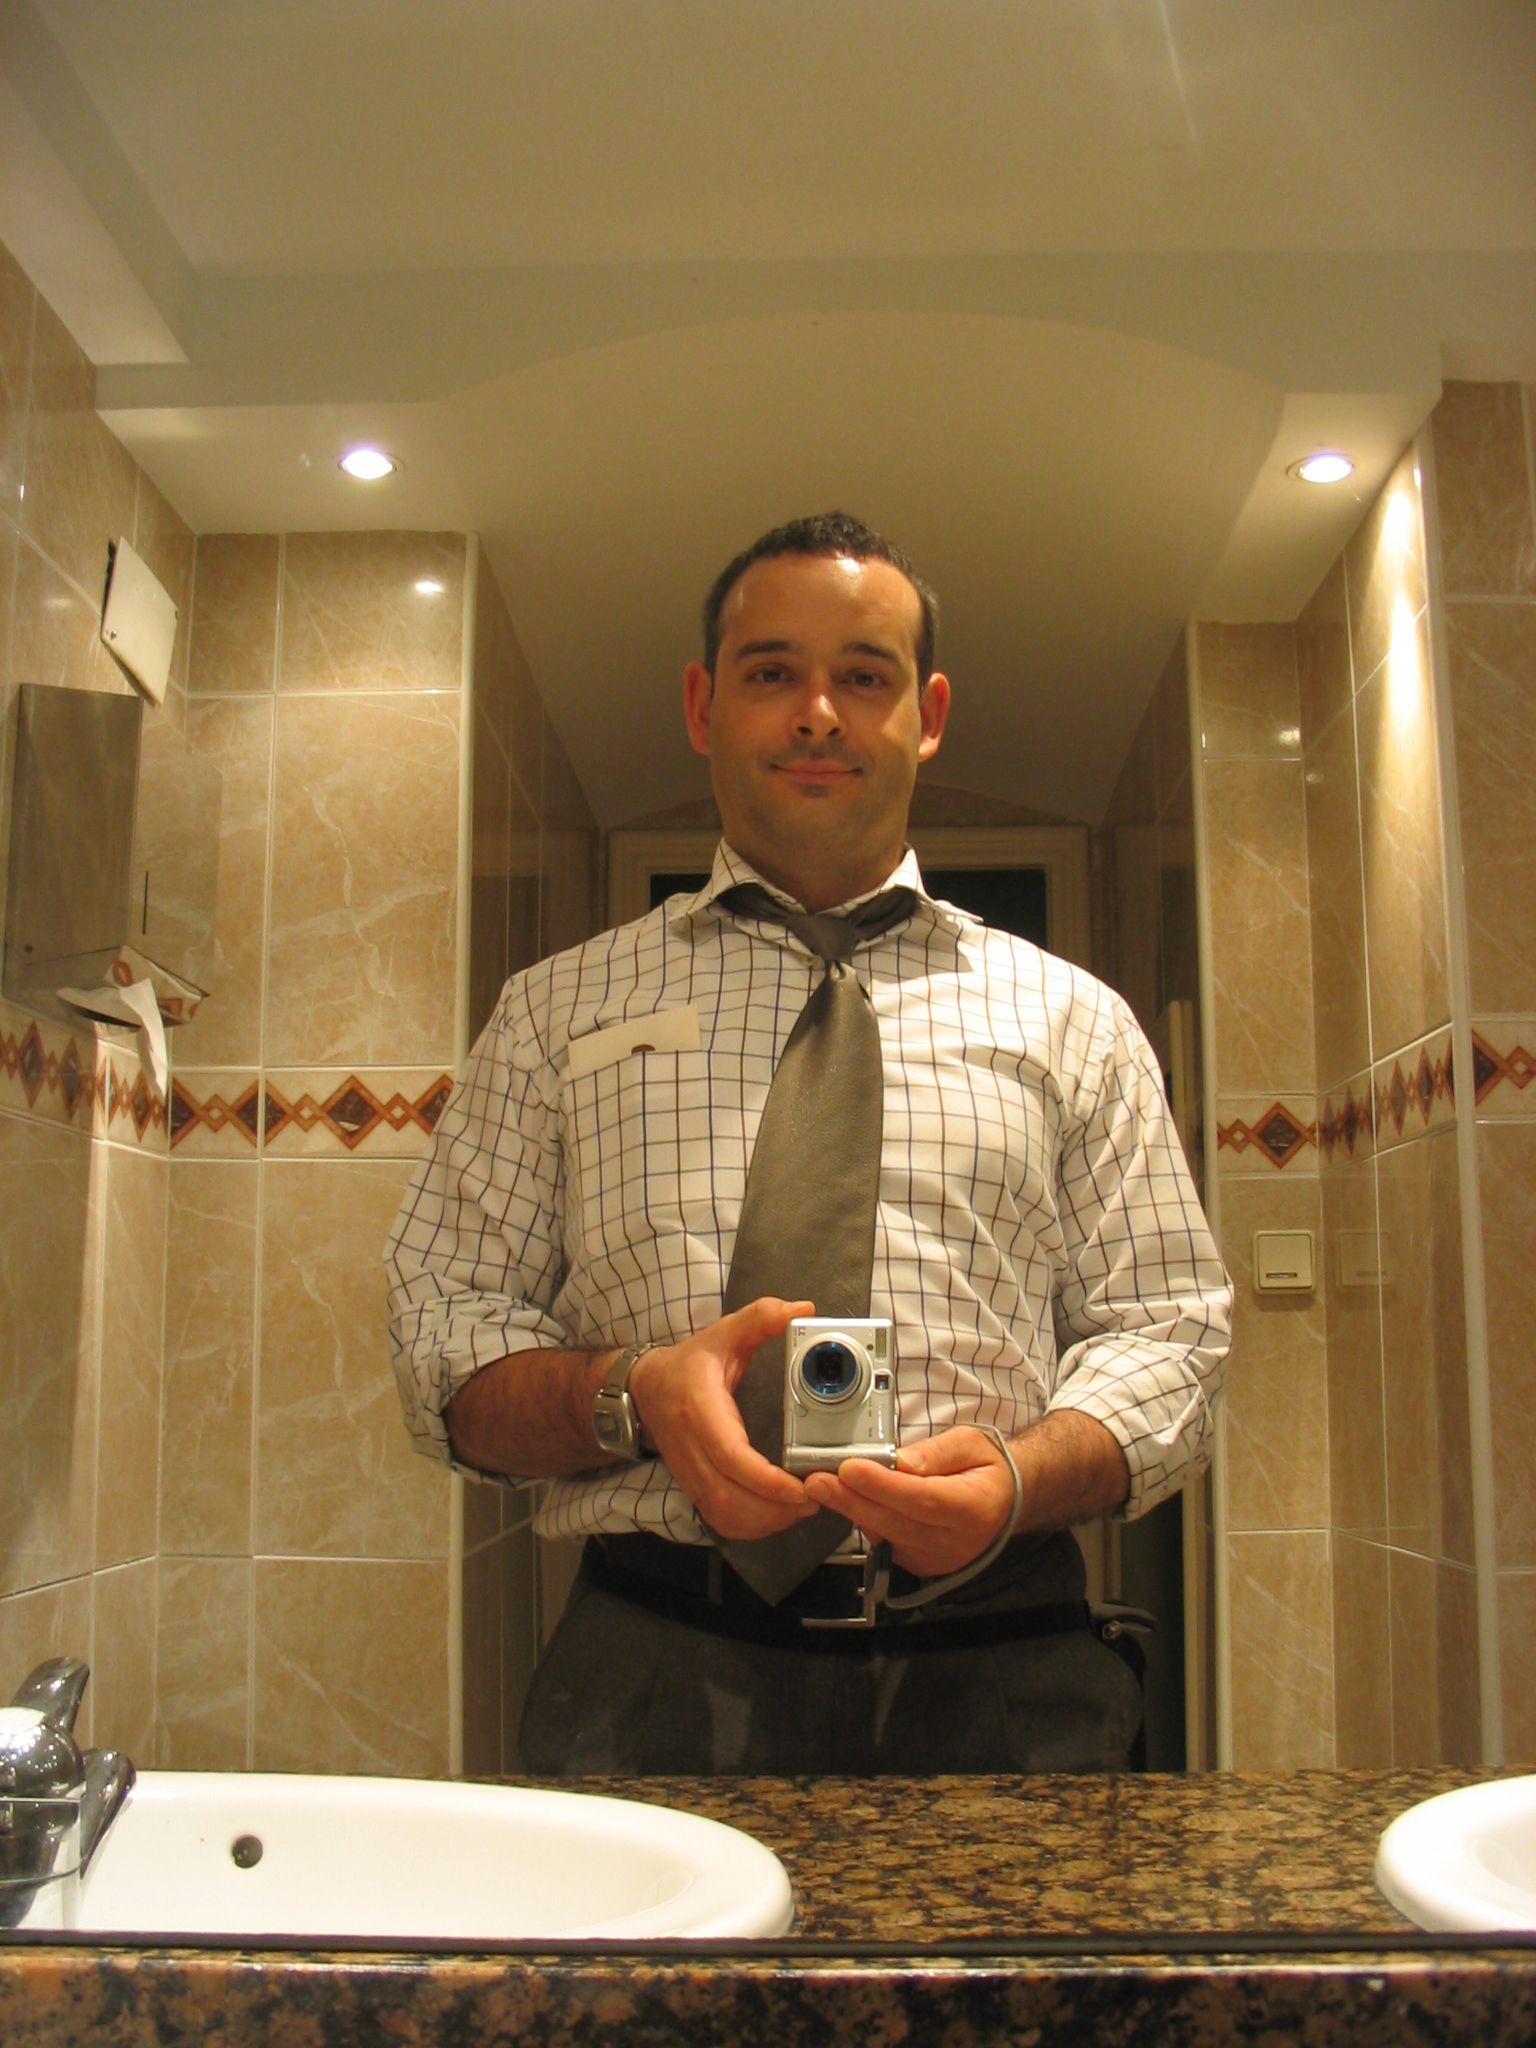 a man with a camera standing in front of a bathroom mirror